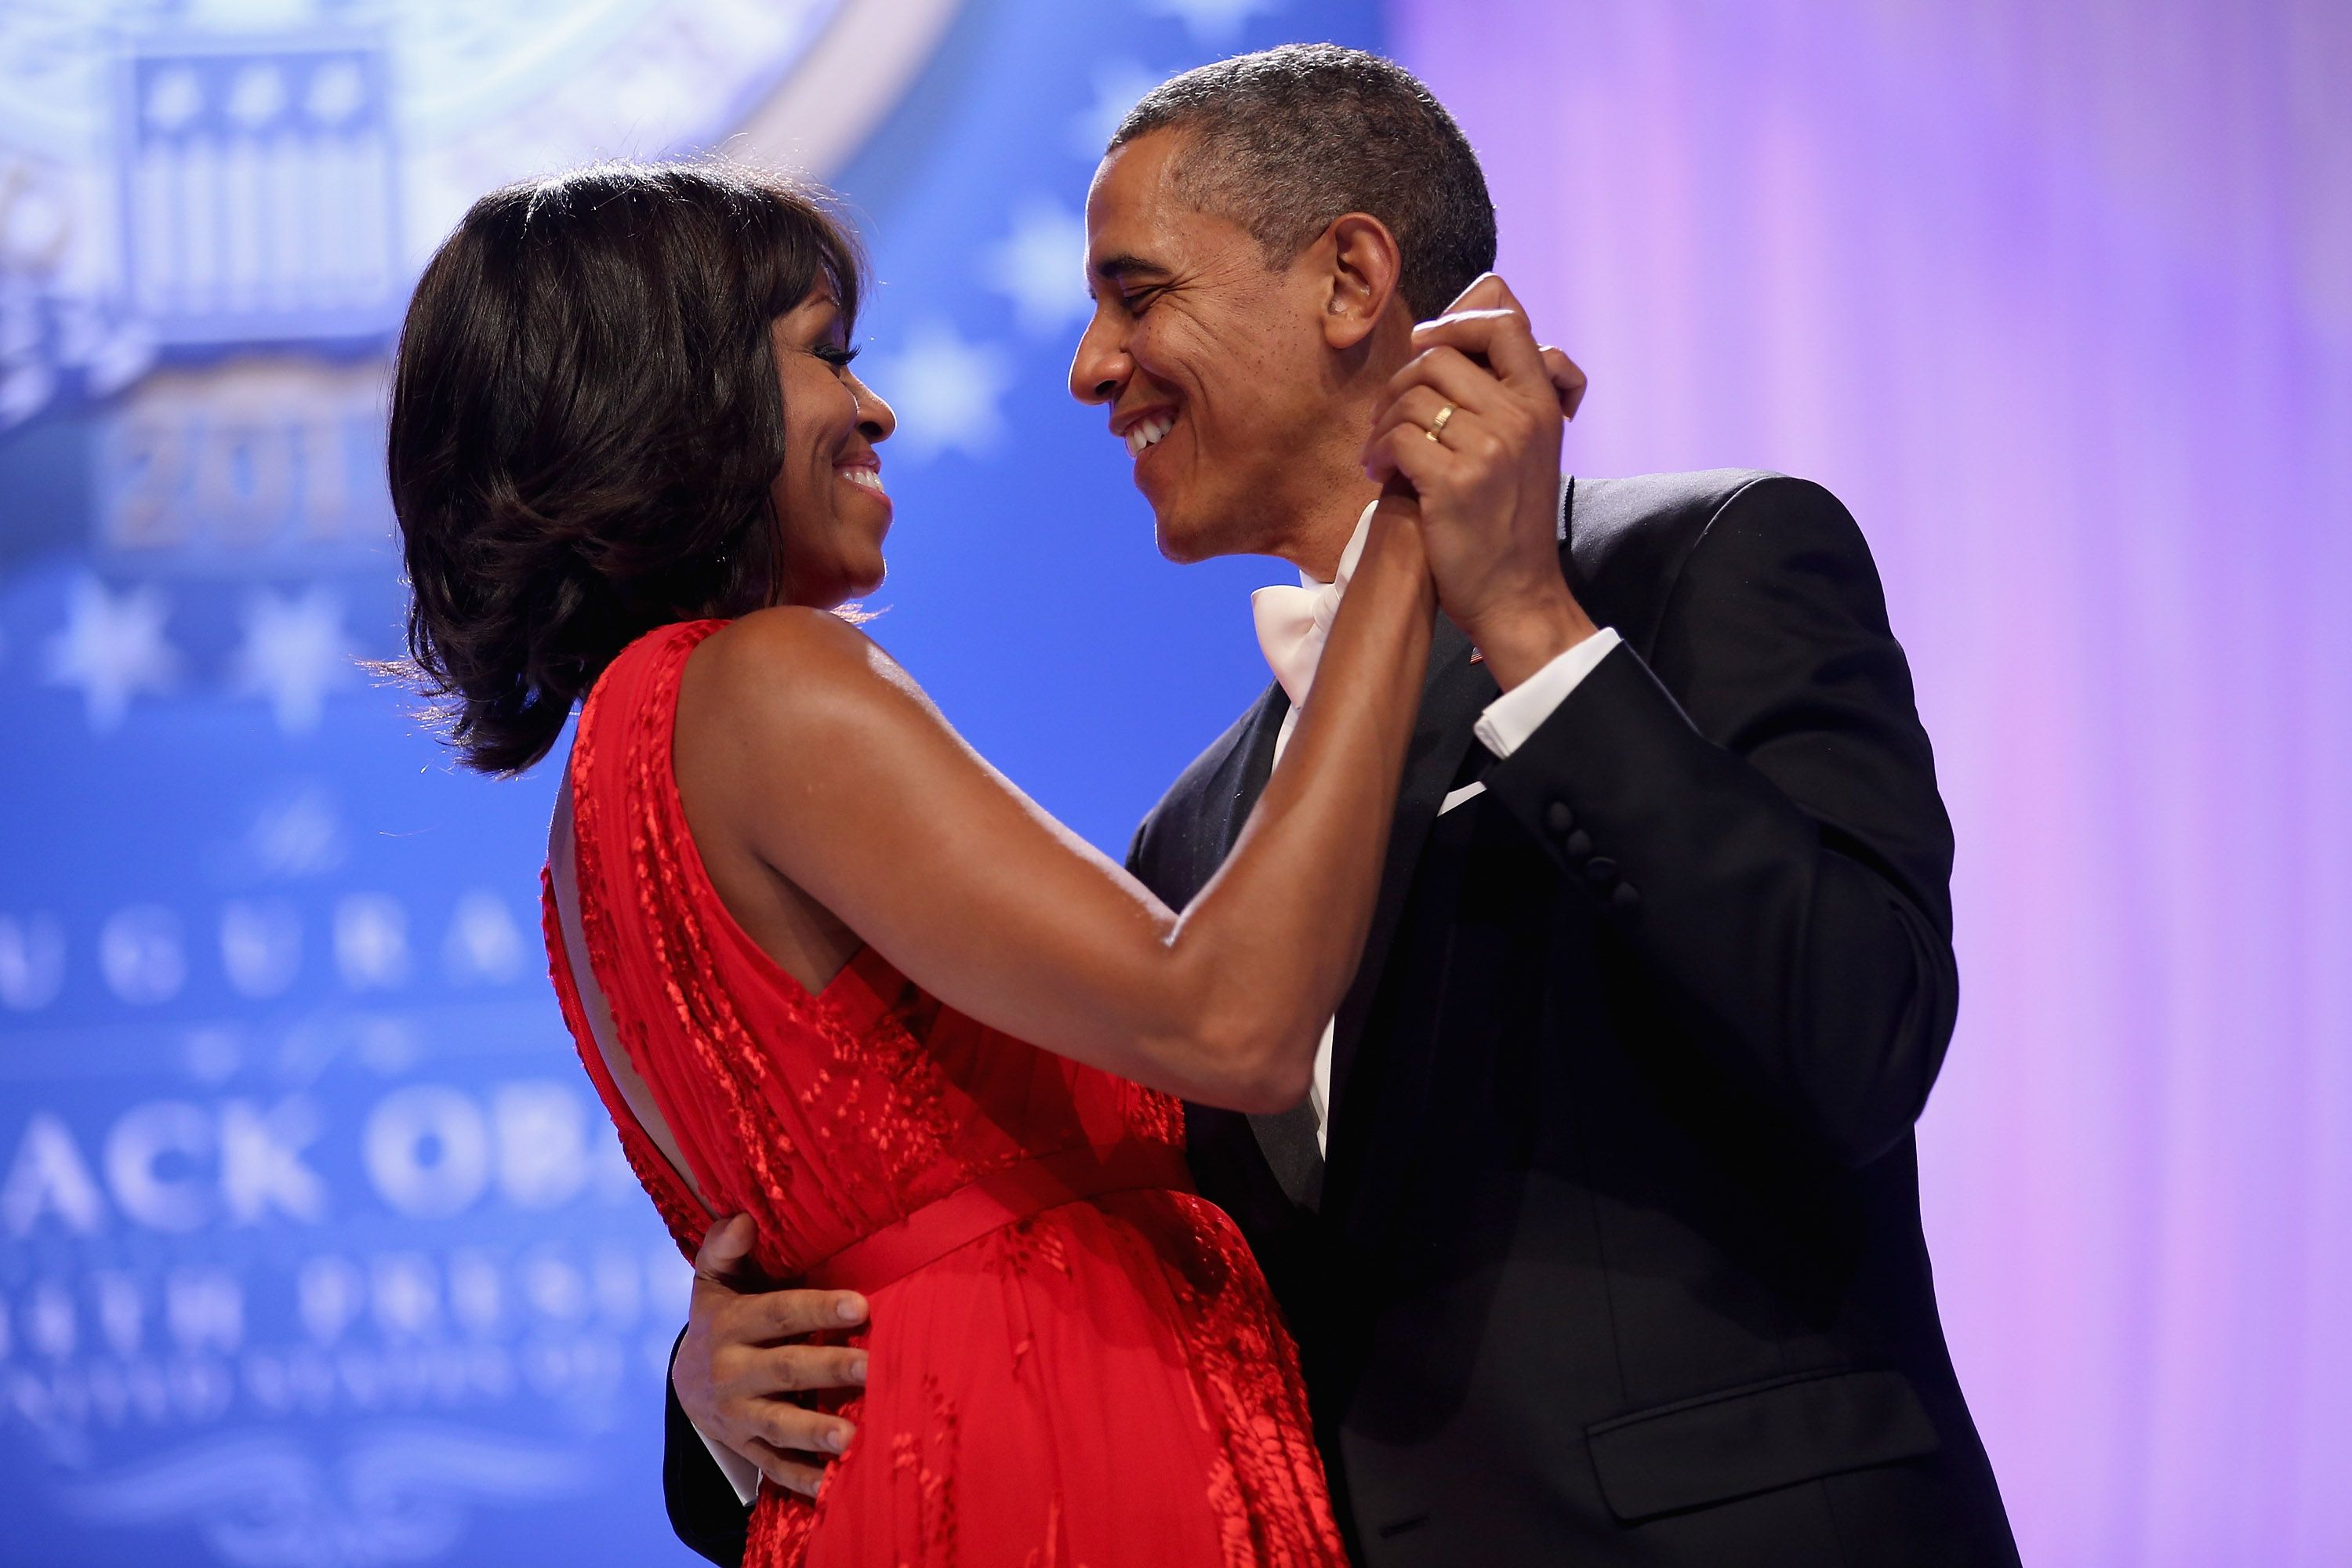 Barack Obama and Michelle Obama dance together during the Comander-in-Chief's Inaugural Ball at the Walter Washington Convention Center January 21, 2013 in Washington, DC | Source: Getty Images